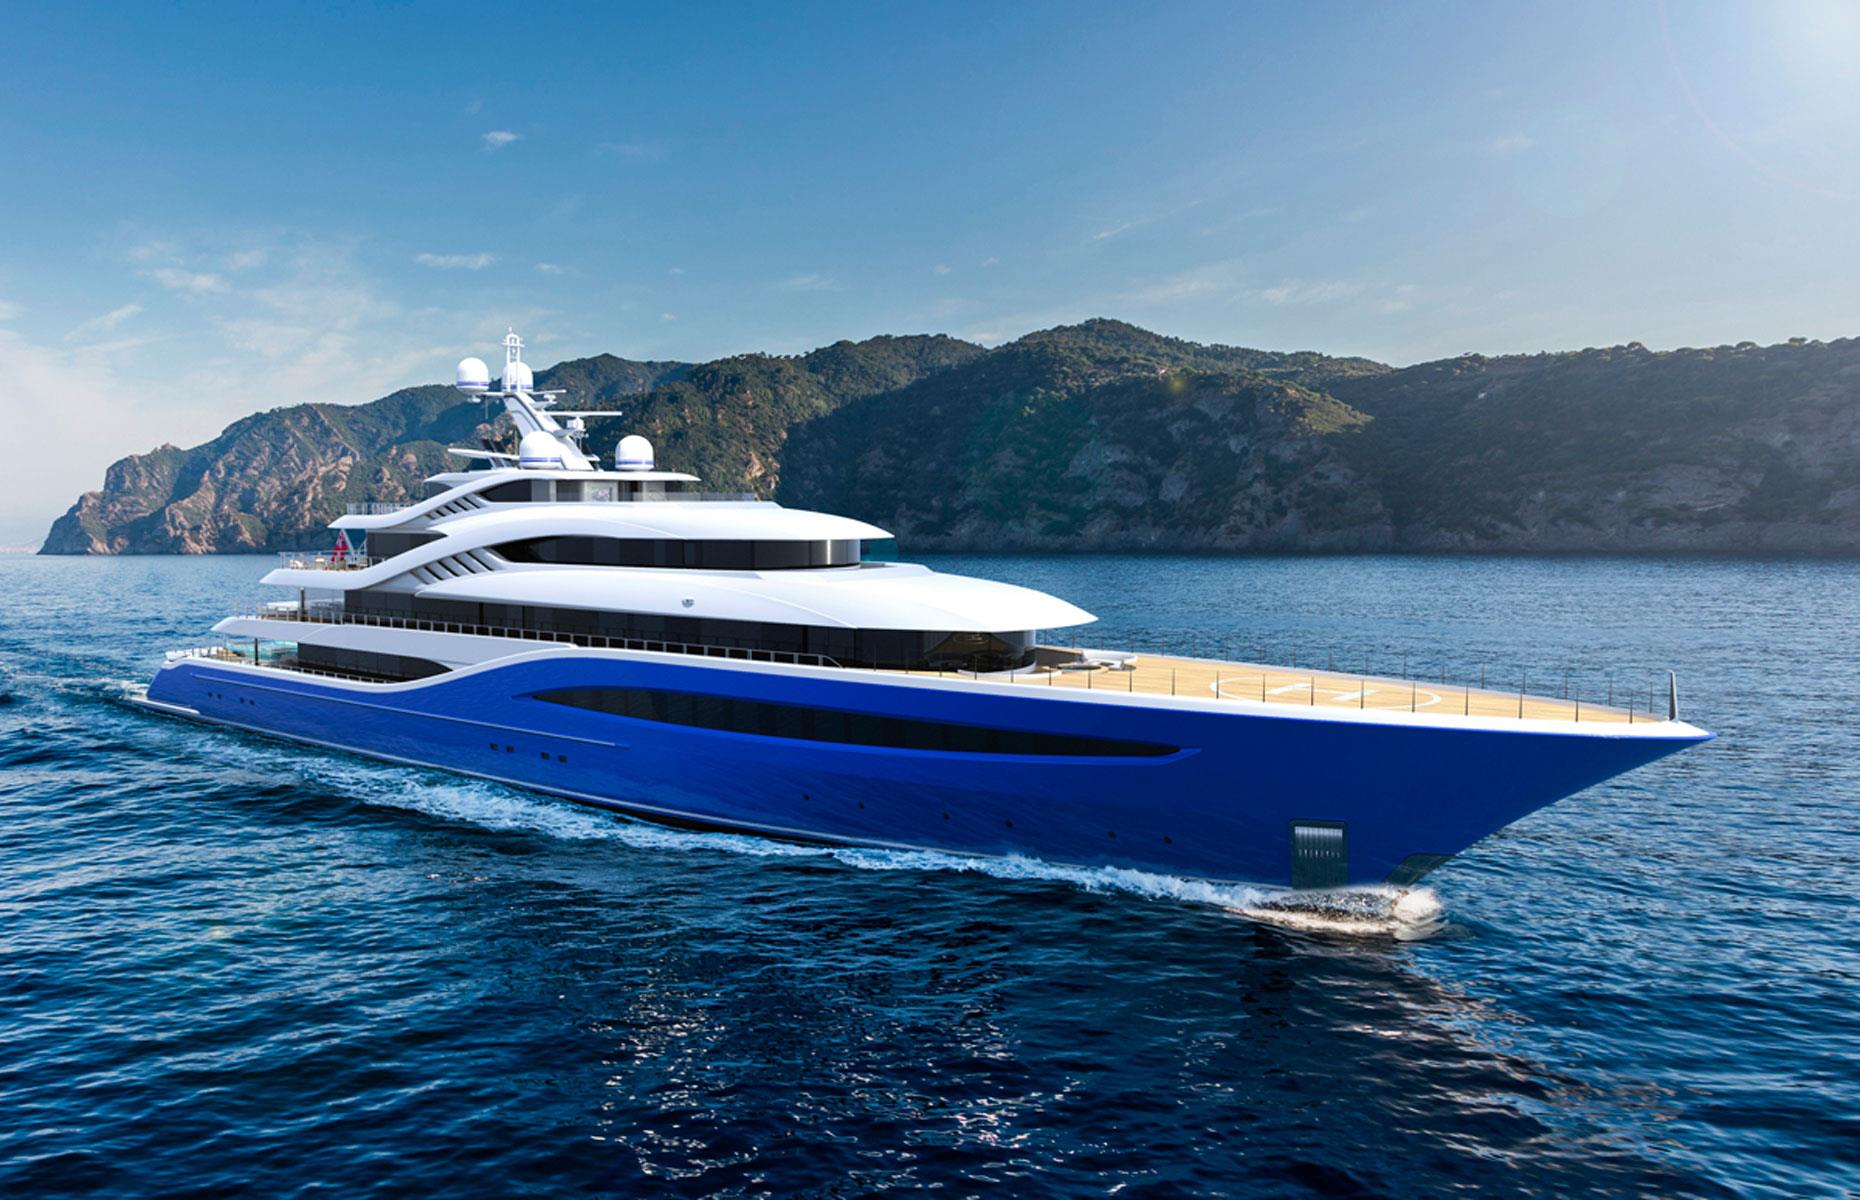 <p>Just weeks after <em>Project Toro</em> was sold in 2021, Turquoise Yachts found a buyer for <em>Project Vento</em>. As is the case with <em>Project Toro</em>, the identity of the owner and the price tag have not been divulged.</p>  <p>At 285 feet (87m) long, <em>Project Vento</em> is the largest superyacht ever built by Turquoise, with the company teaming up with long-time collaborator London's H2 Yacht Design to work on the boat's aesthetics. The result? A distinctive two-tone white and blue exterior with soft, flowing lines.</p>